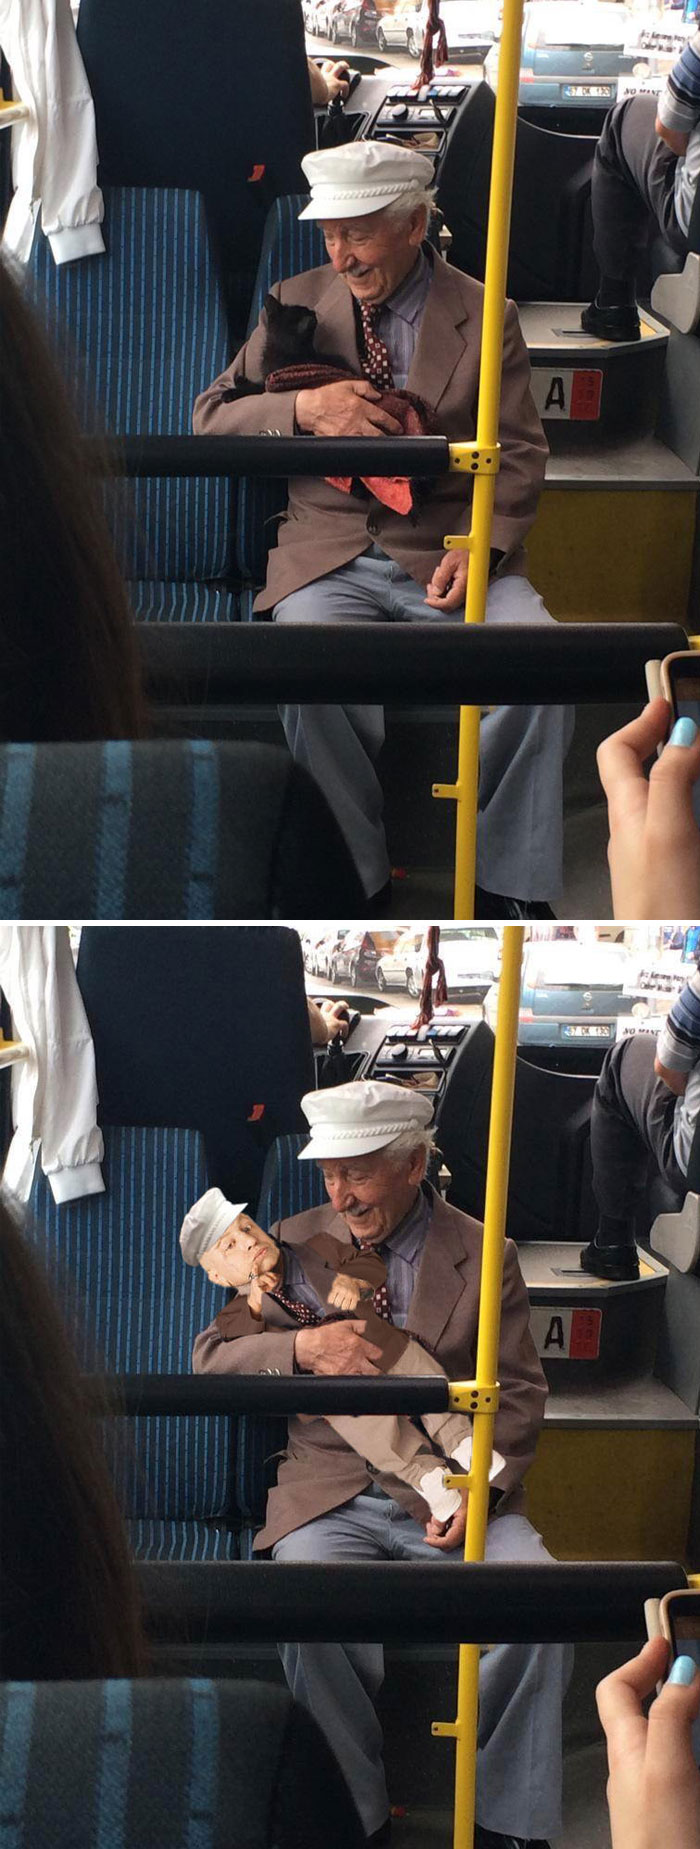 This Man Lovingly Gazing At His Cat While On The Bus